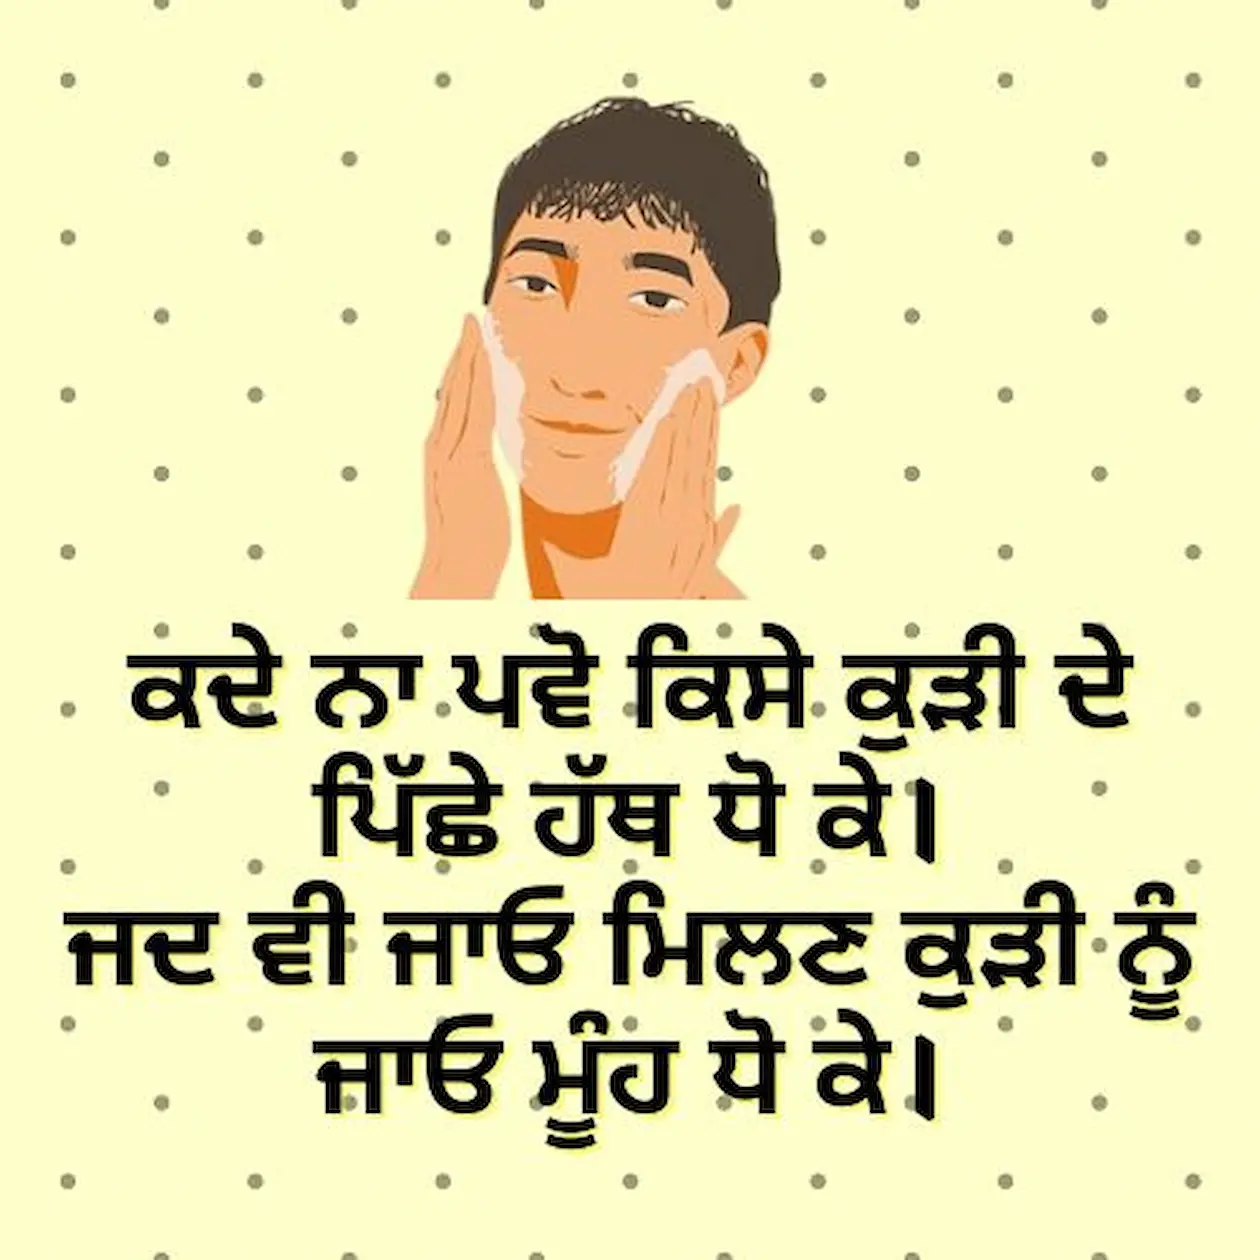 A boy washing mouth animation. Funny joke in Punjabi saying should not follow a girl but instead improve your personality.
